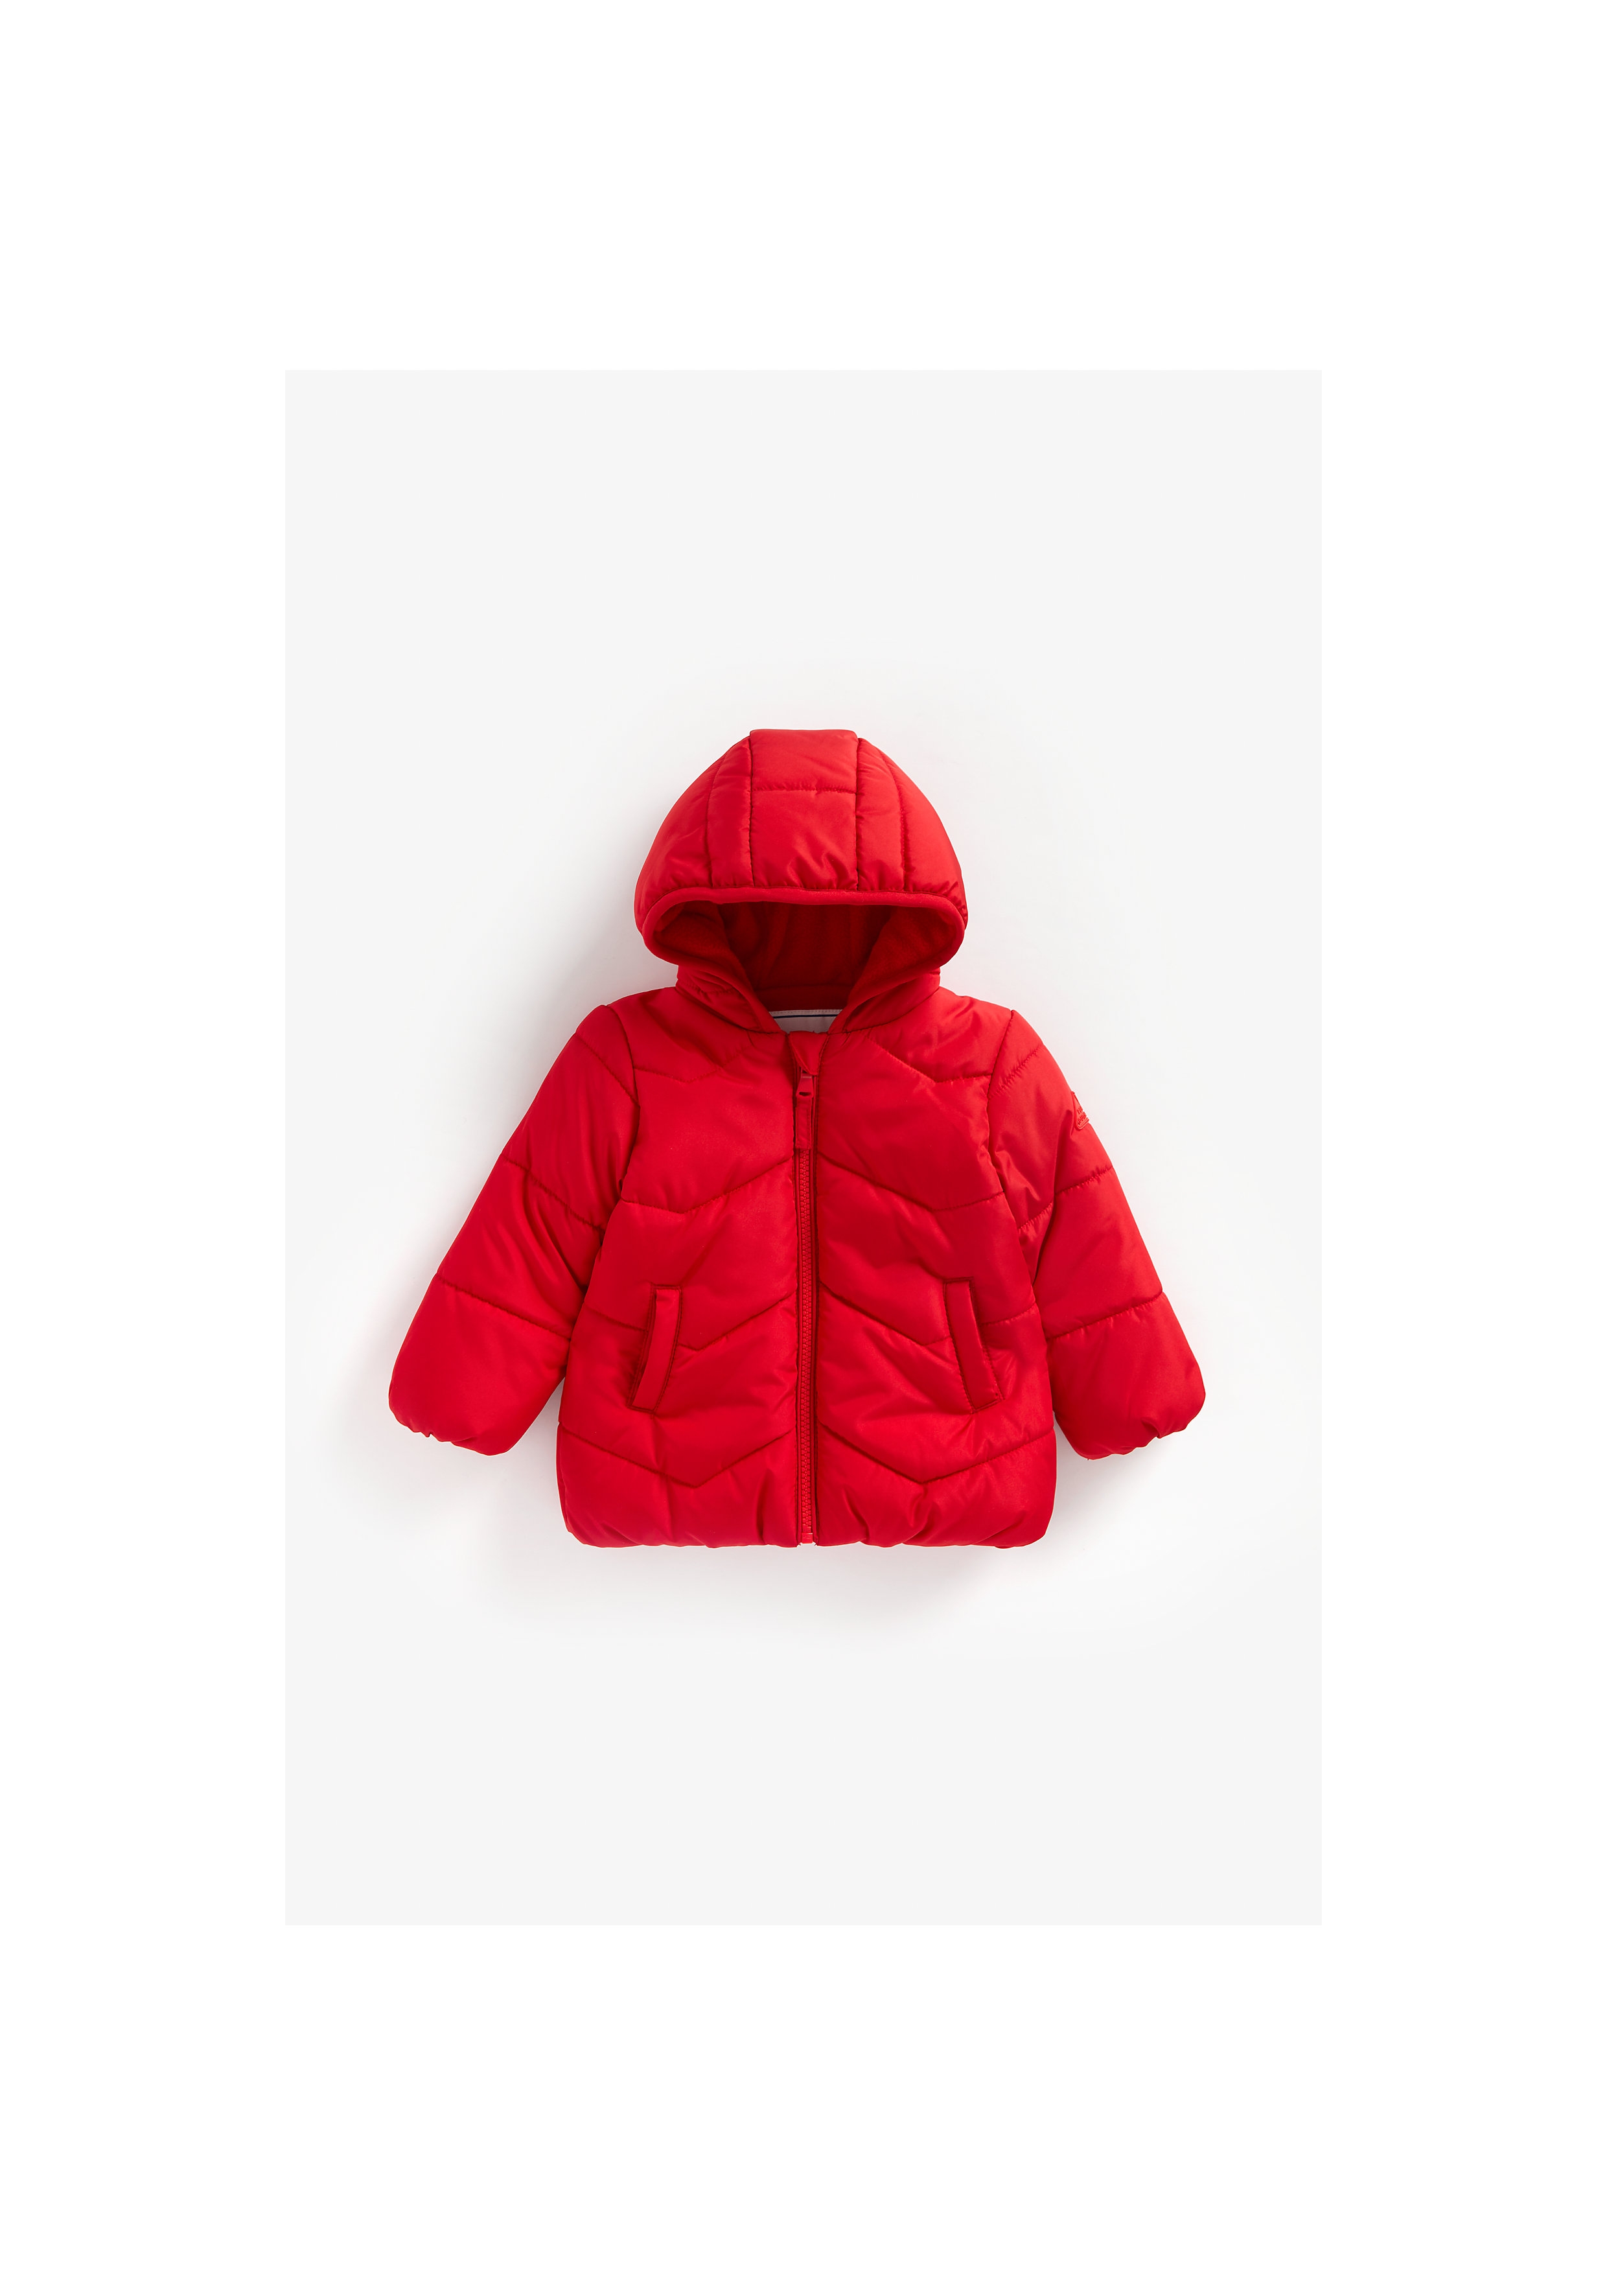 Mothercare | Boys Full Sleeves Fleece Lined Quilted Jacket Hooded - Red 0